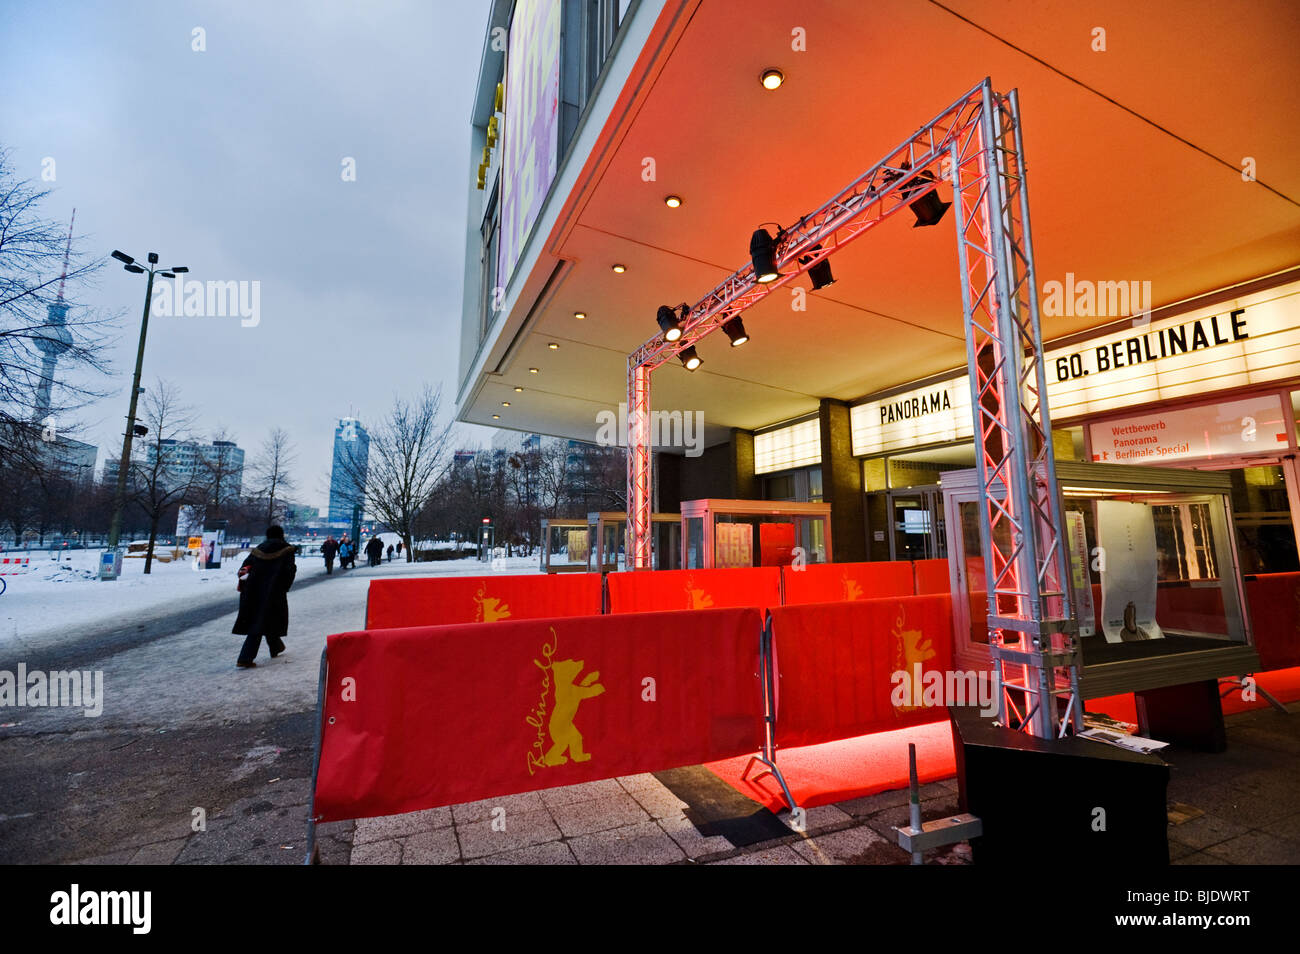 Red carpet at the Kino International cinema at the Berlinale 2010 film festival, Berlin, Germany, Europe Stock Photo